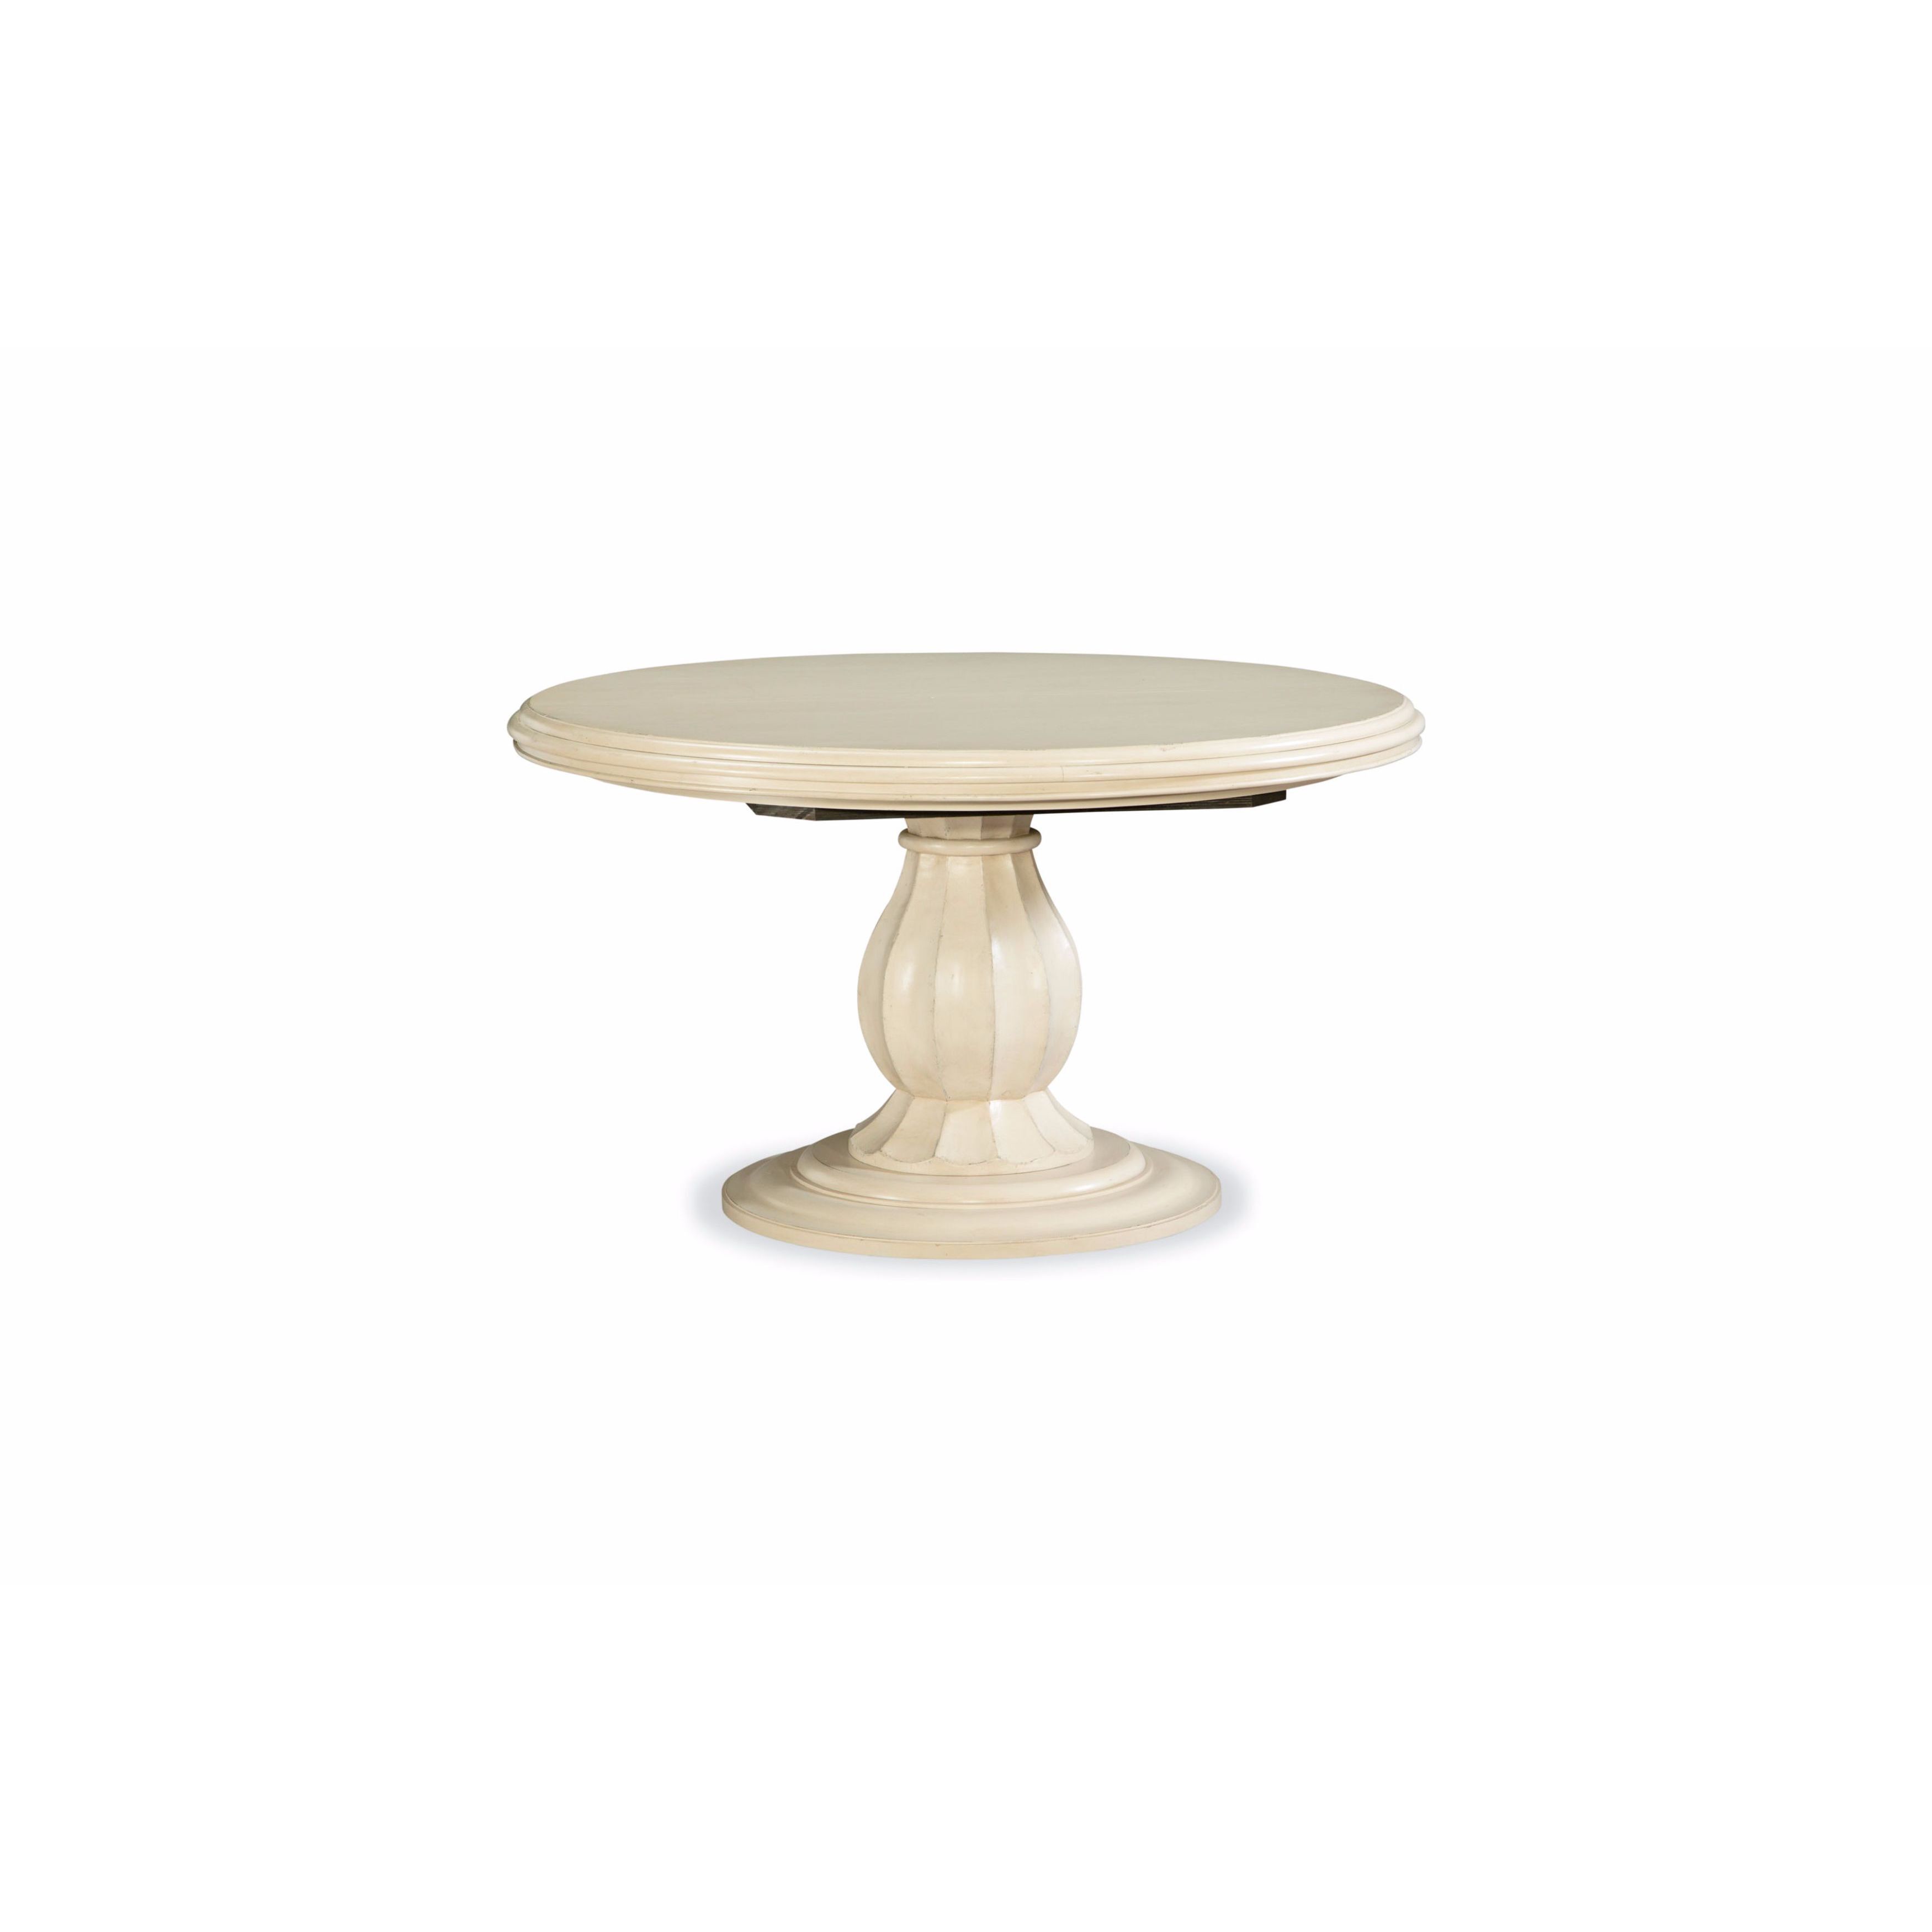 Paula Deen Round Dining Table